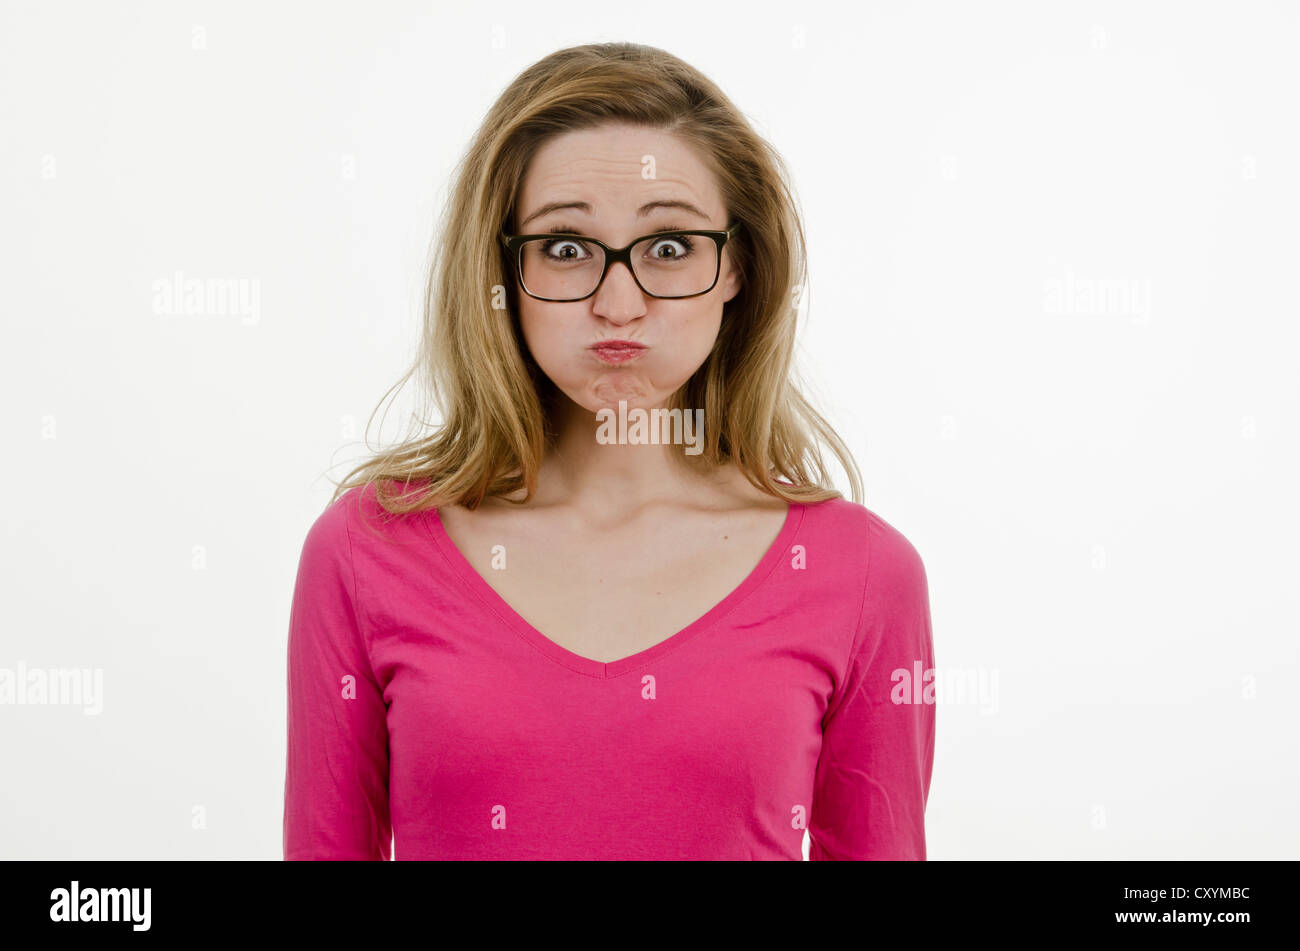 Young woman, 25, wearing large glasses, with puffed cheeks Stock Photo